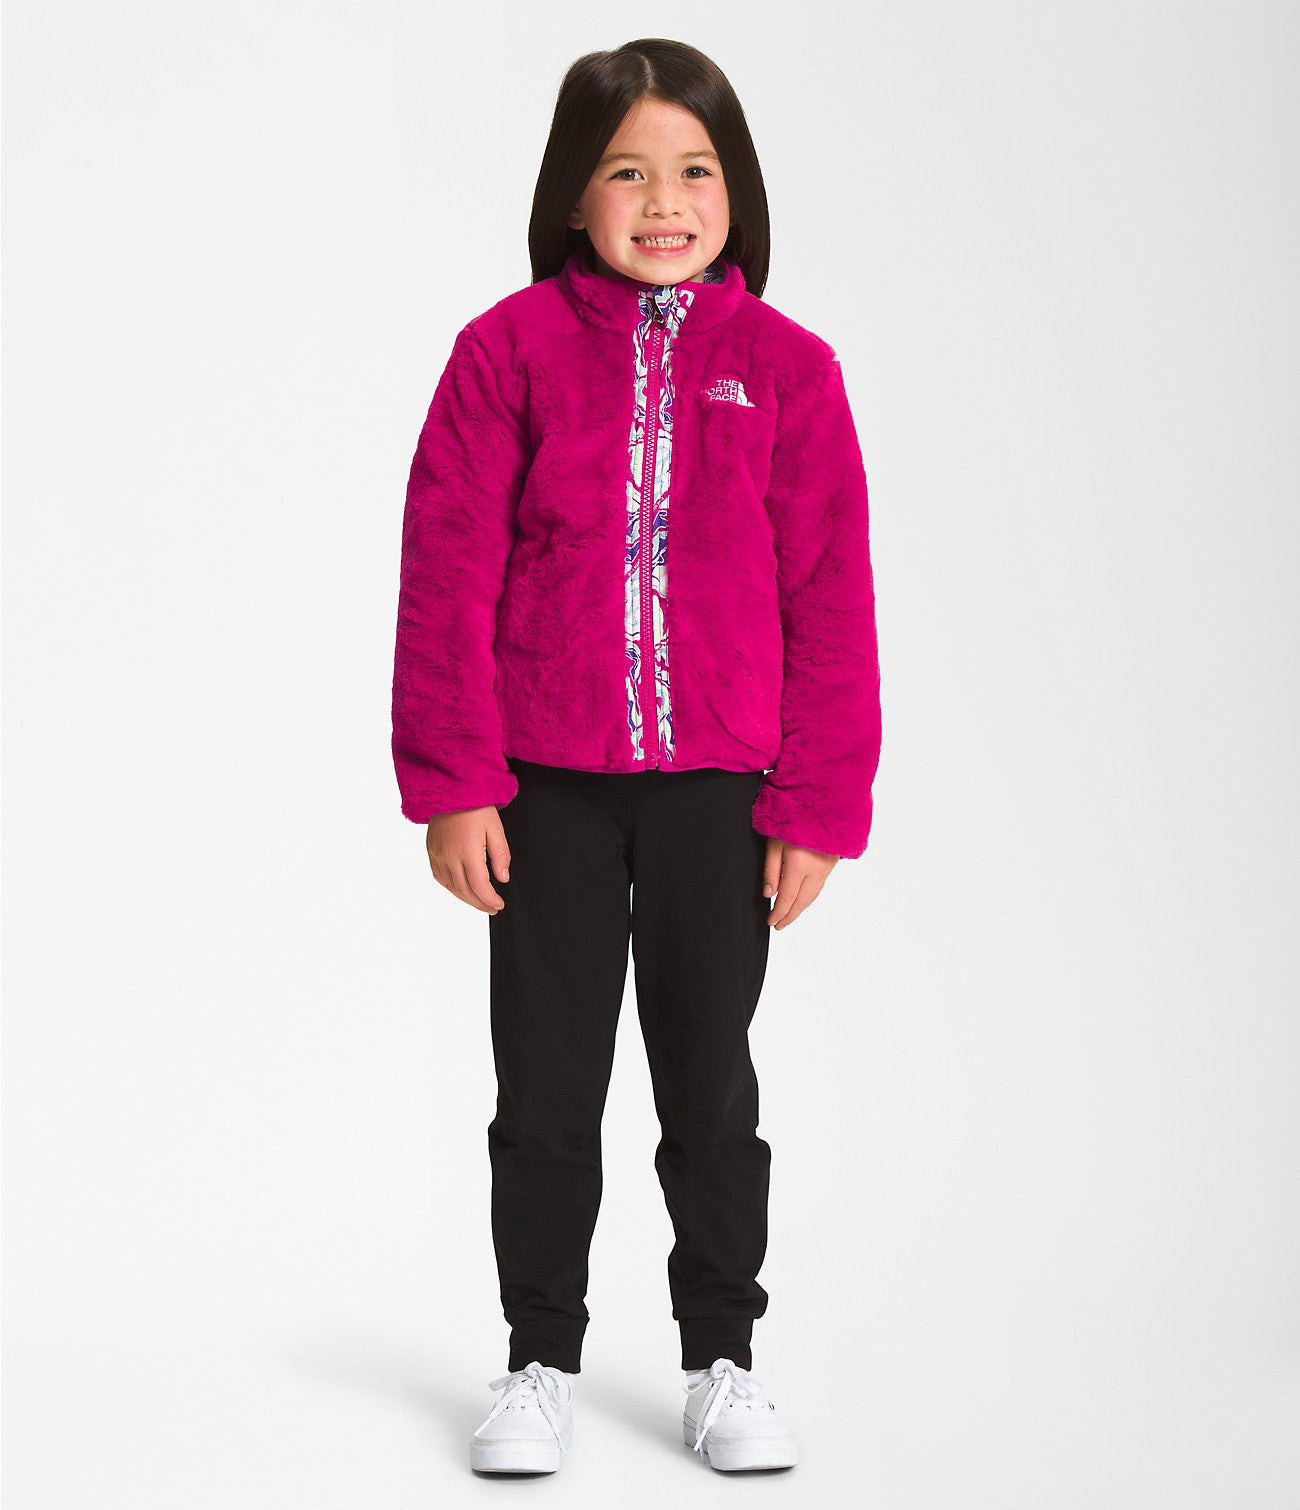 The North Face Kids' Reversible Mossbud Jacket